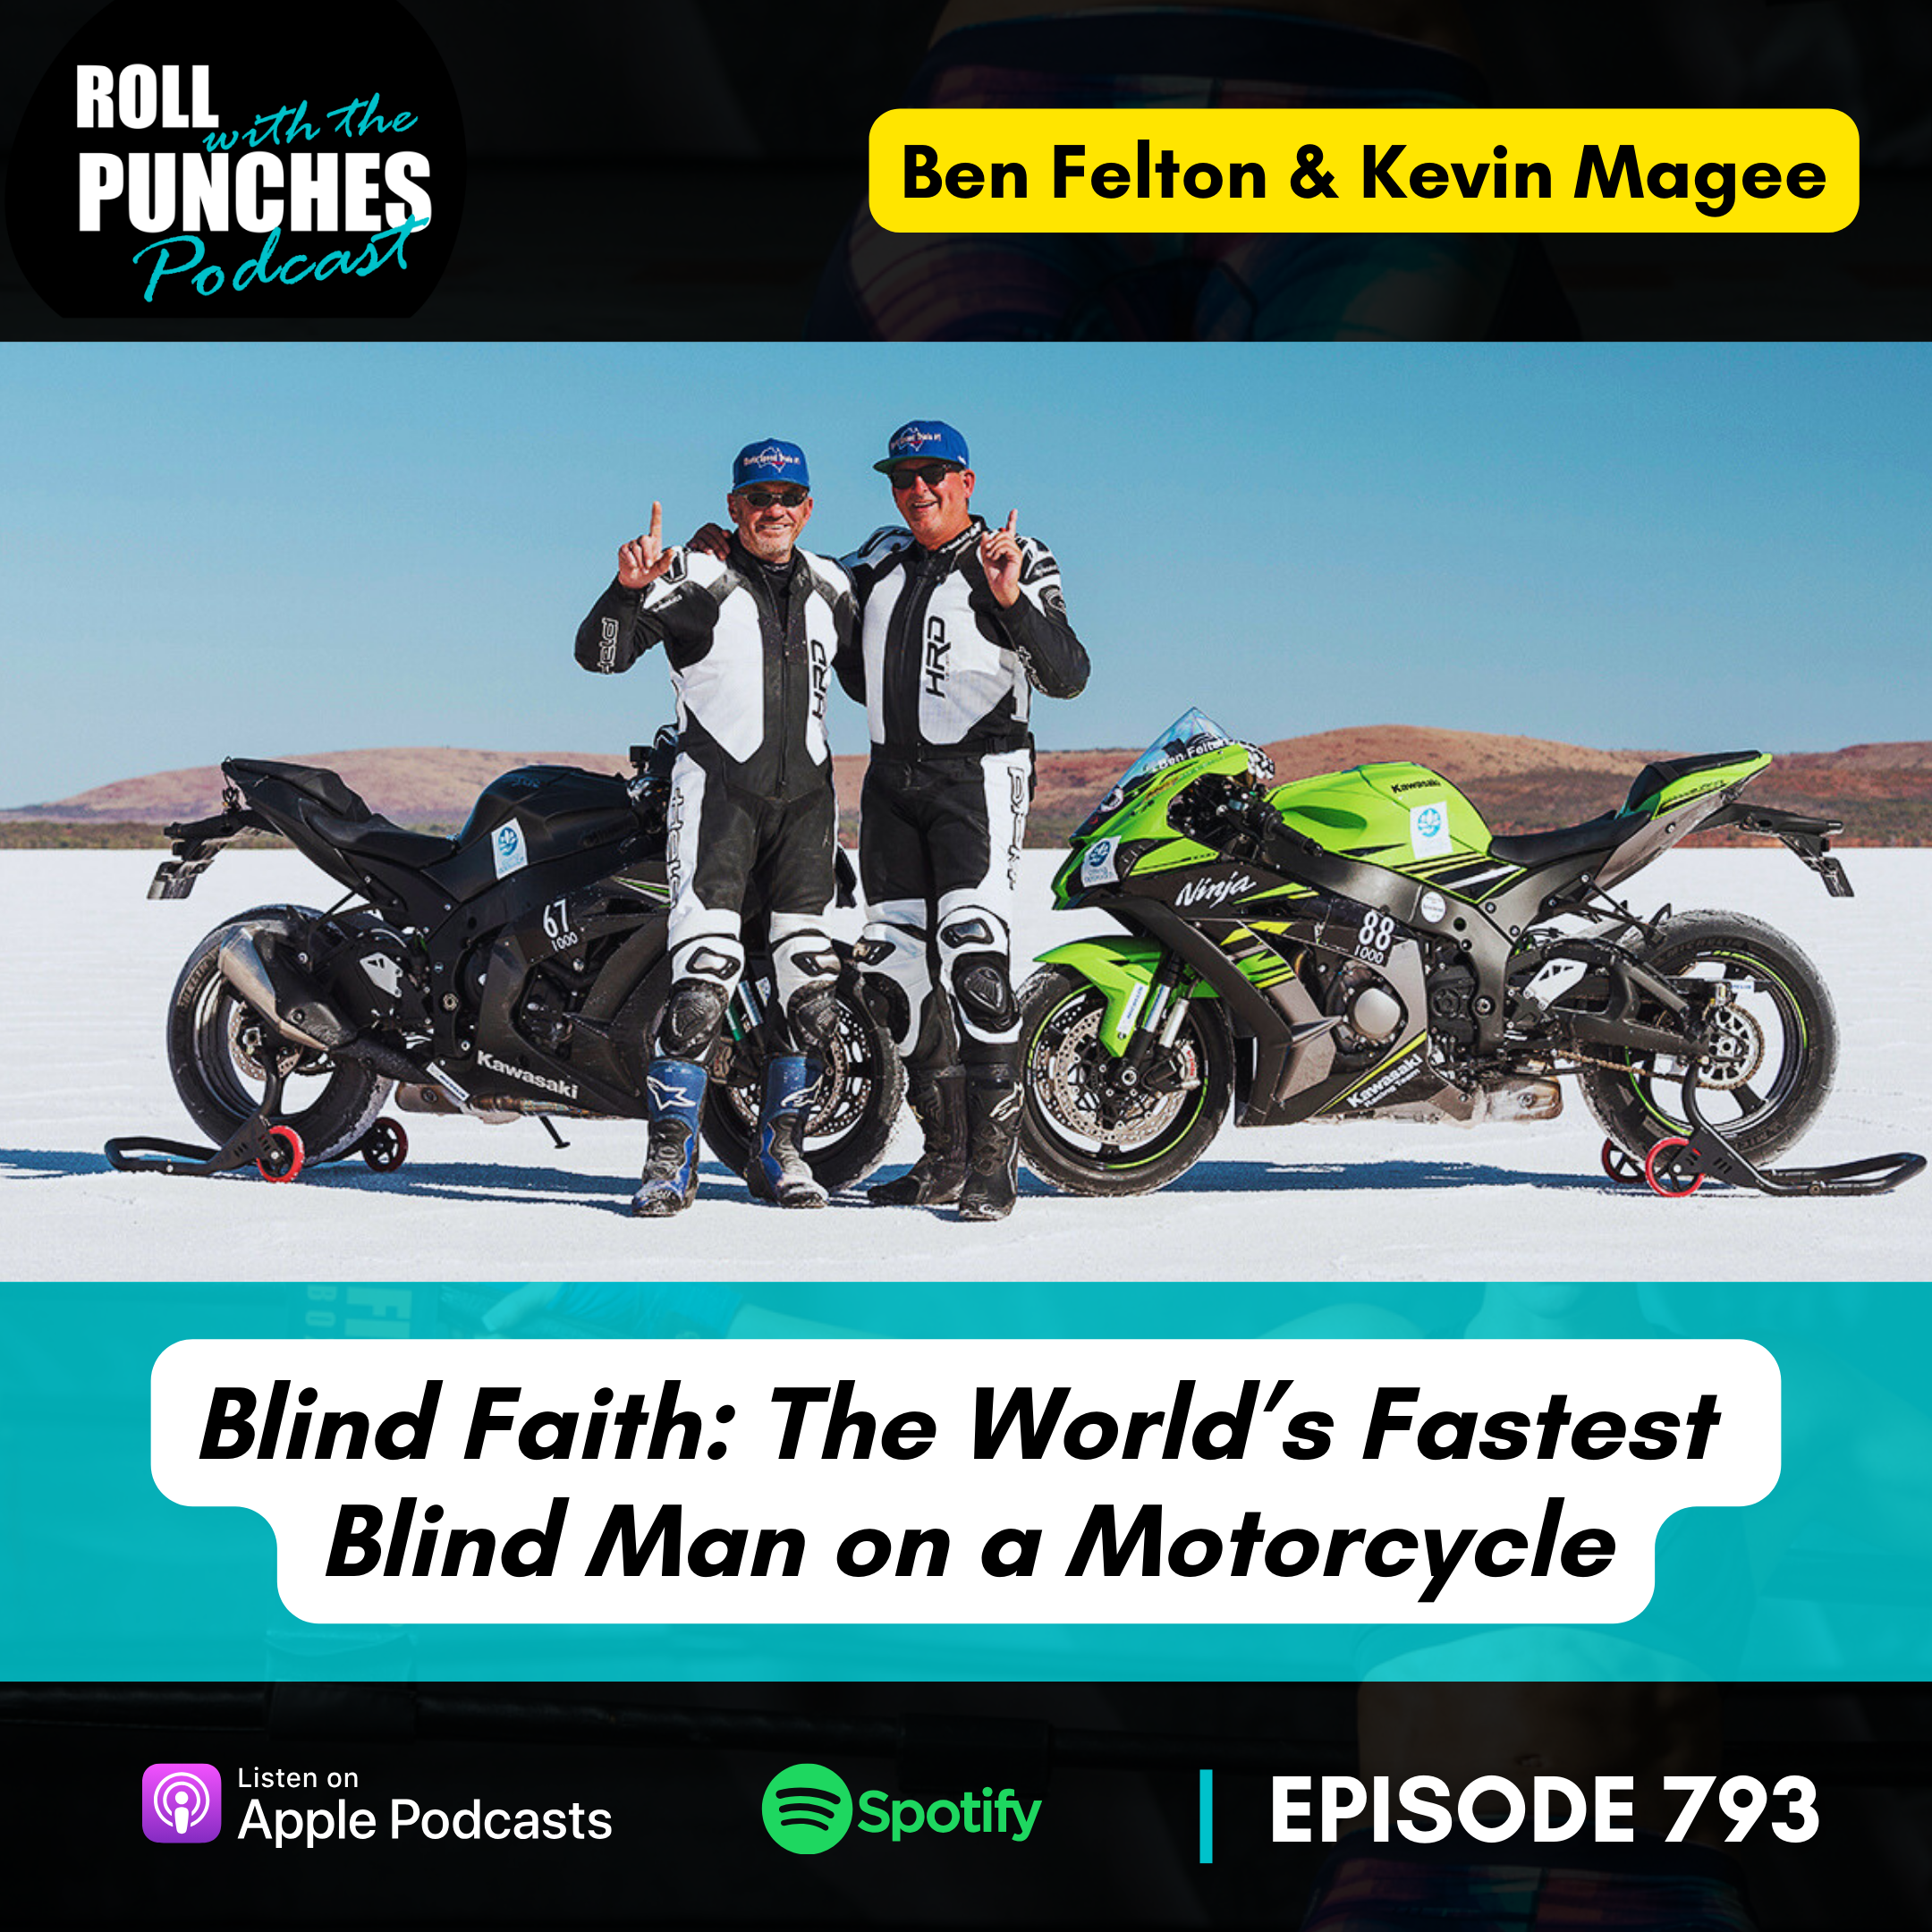 Blind Faith: The World's Fastest Blind Man on a Motorcycle | Ben Felton & Kevin Magee - 793